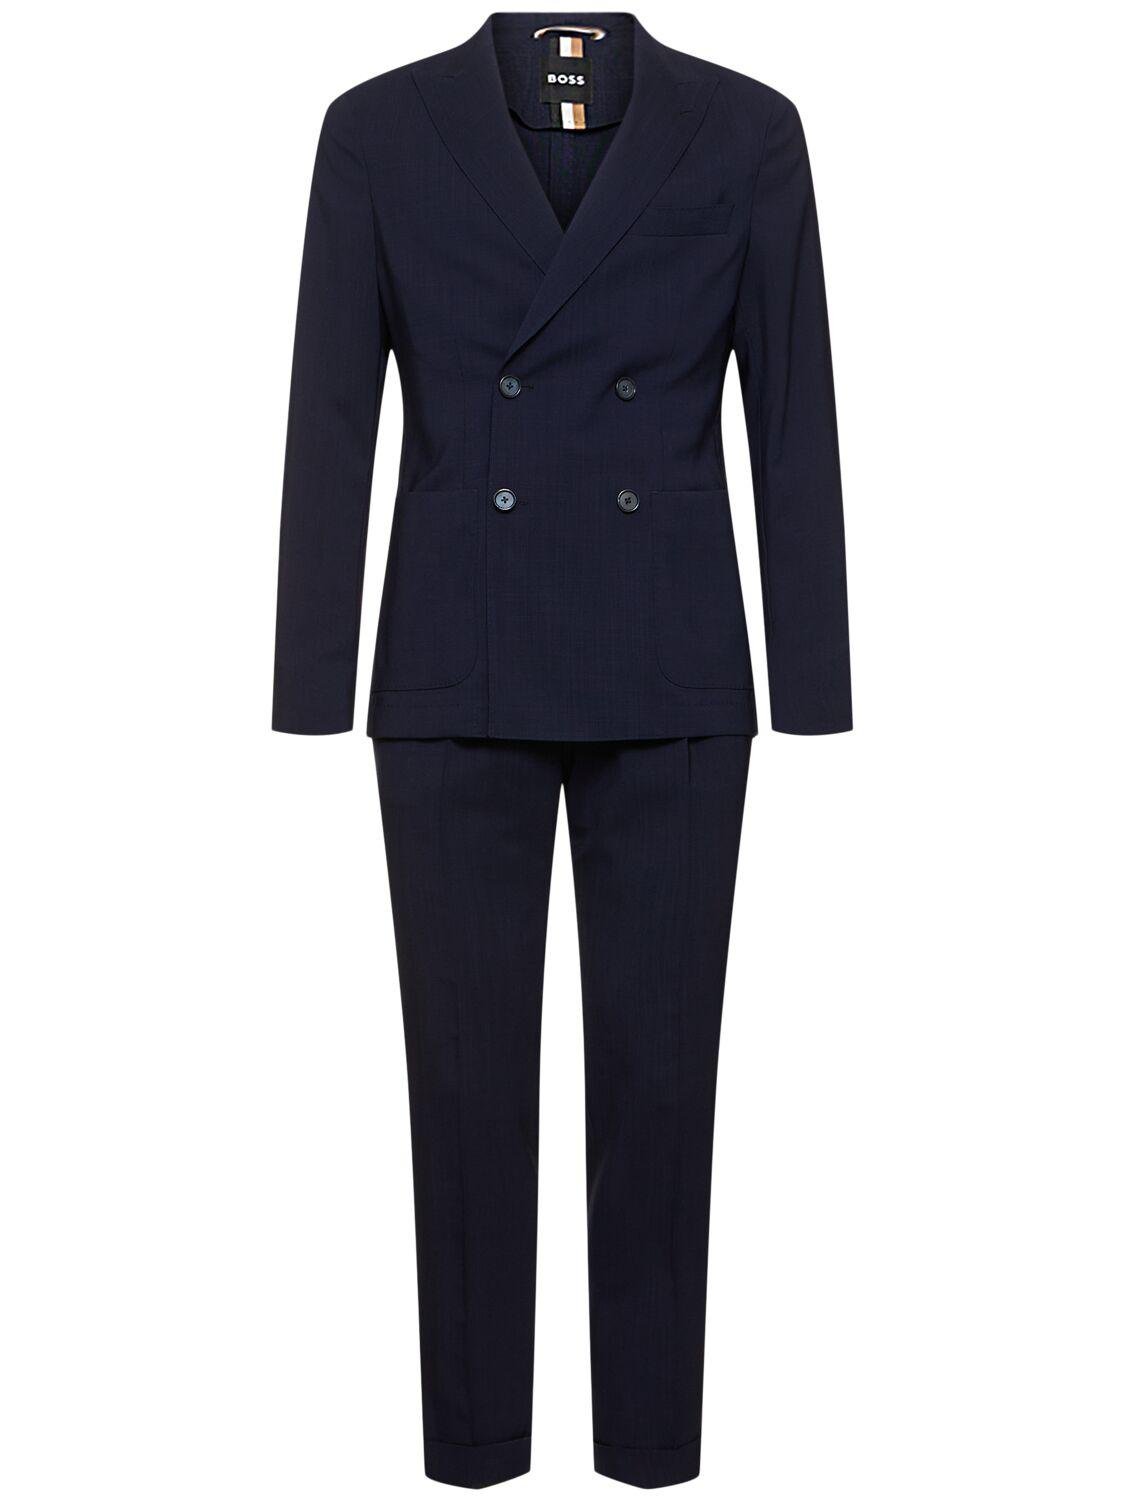 Hanry Double Breasted Wool Suit by HUGO BOSS